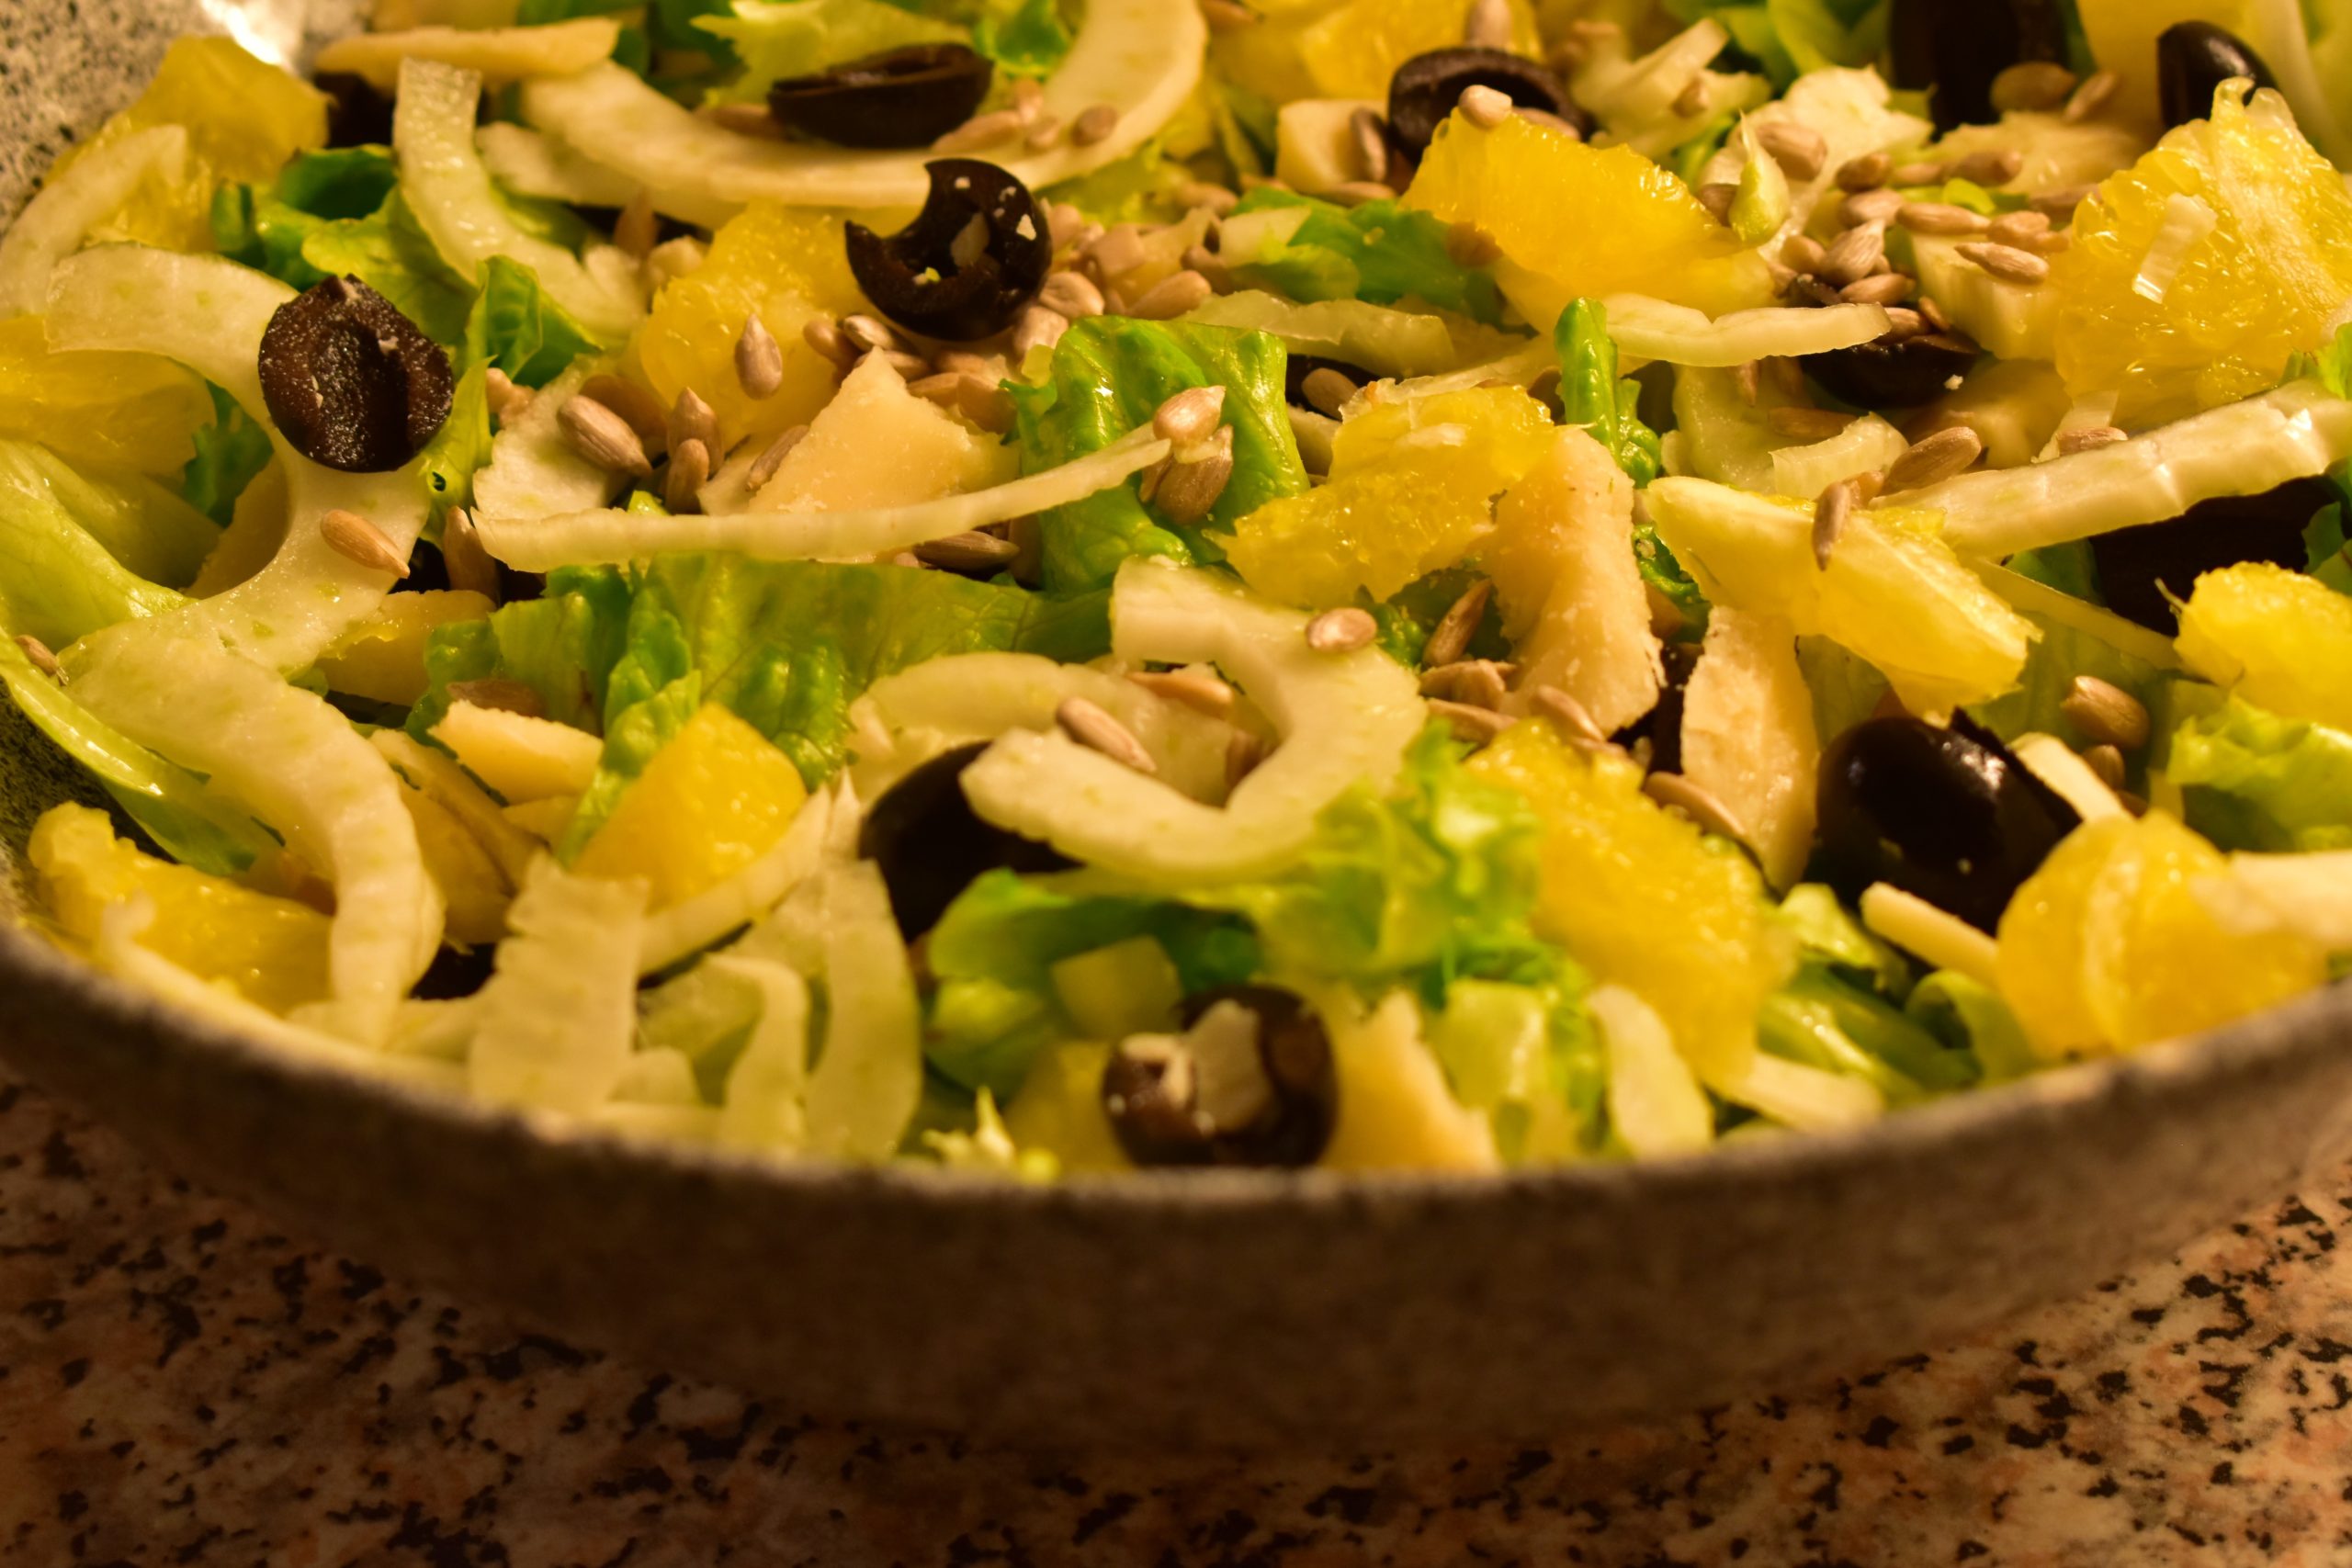 Lettuce with fennel, black olives, sunflower seeds, orange and Grana Padano